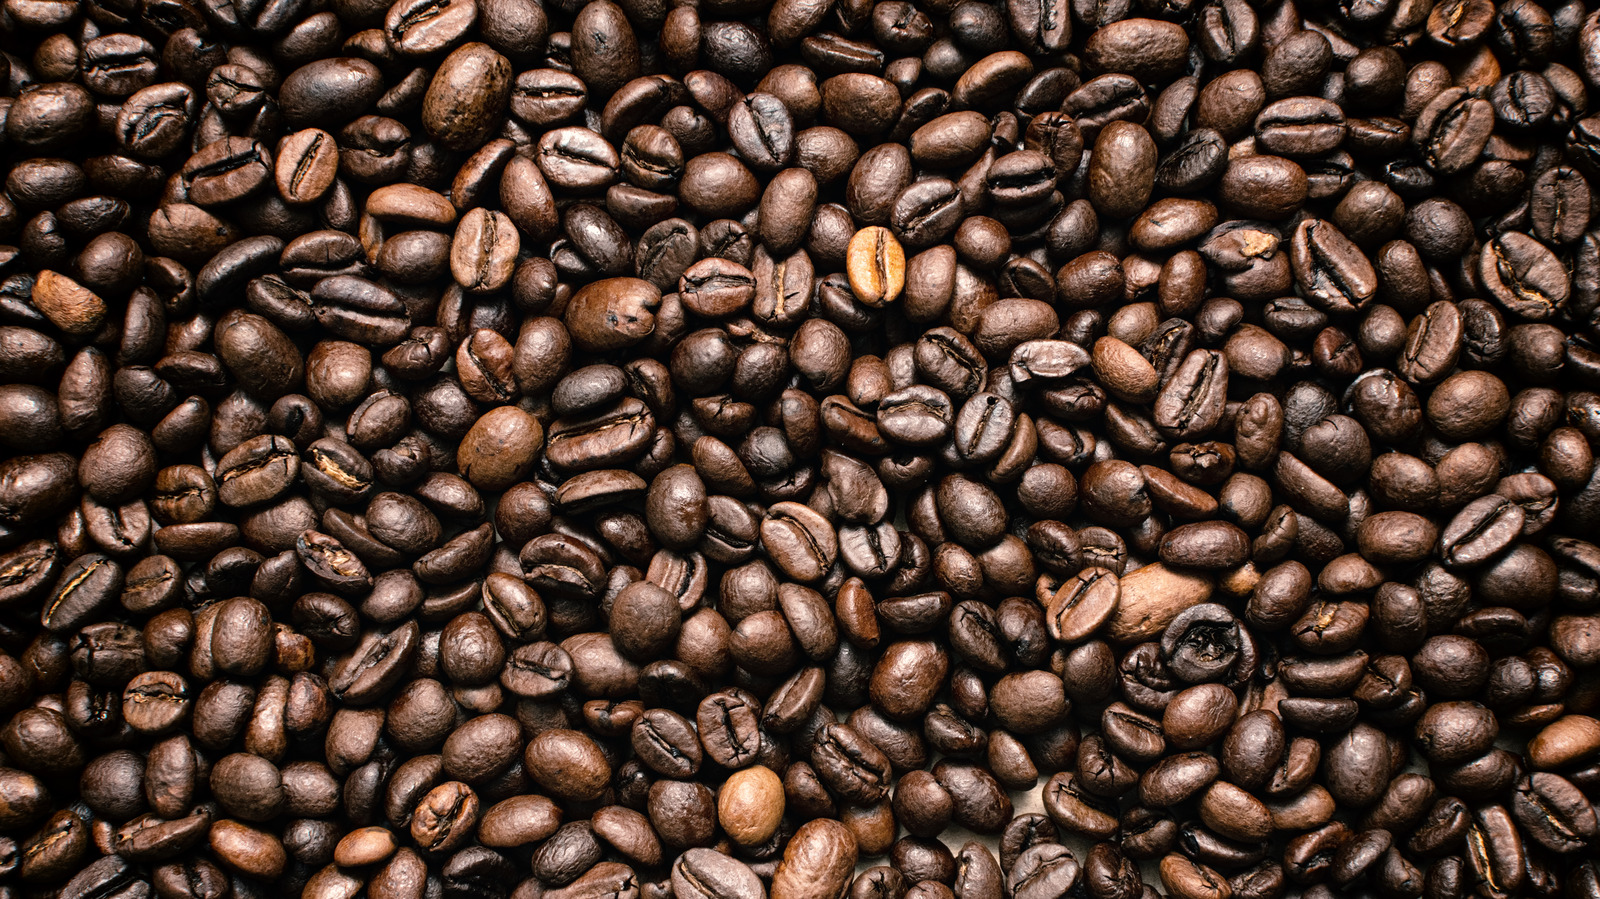 https://www.tastingtable.com/img/gallery/the-absolute-best-ways-to-keep-coffee-beans-fresh/l-intro-1647867653.jpg